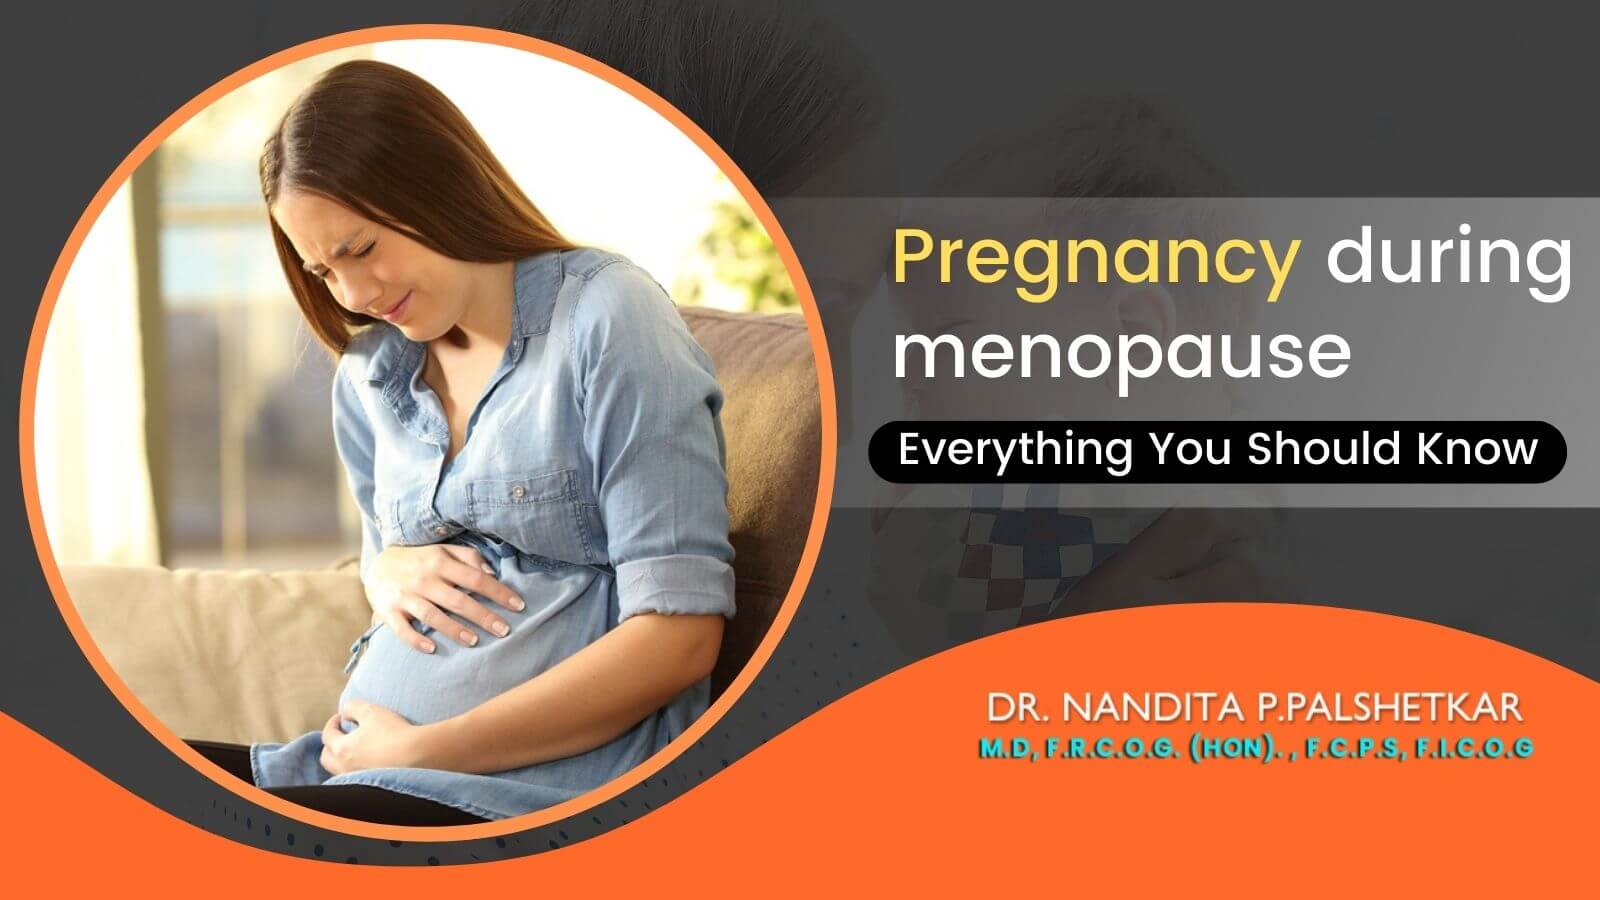 Can I Get Pregnant During Menopause?